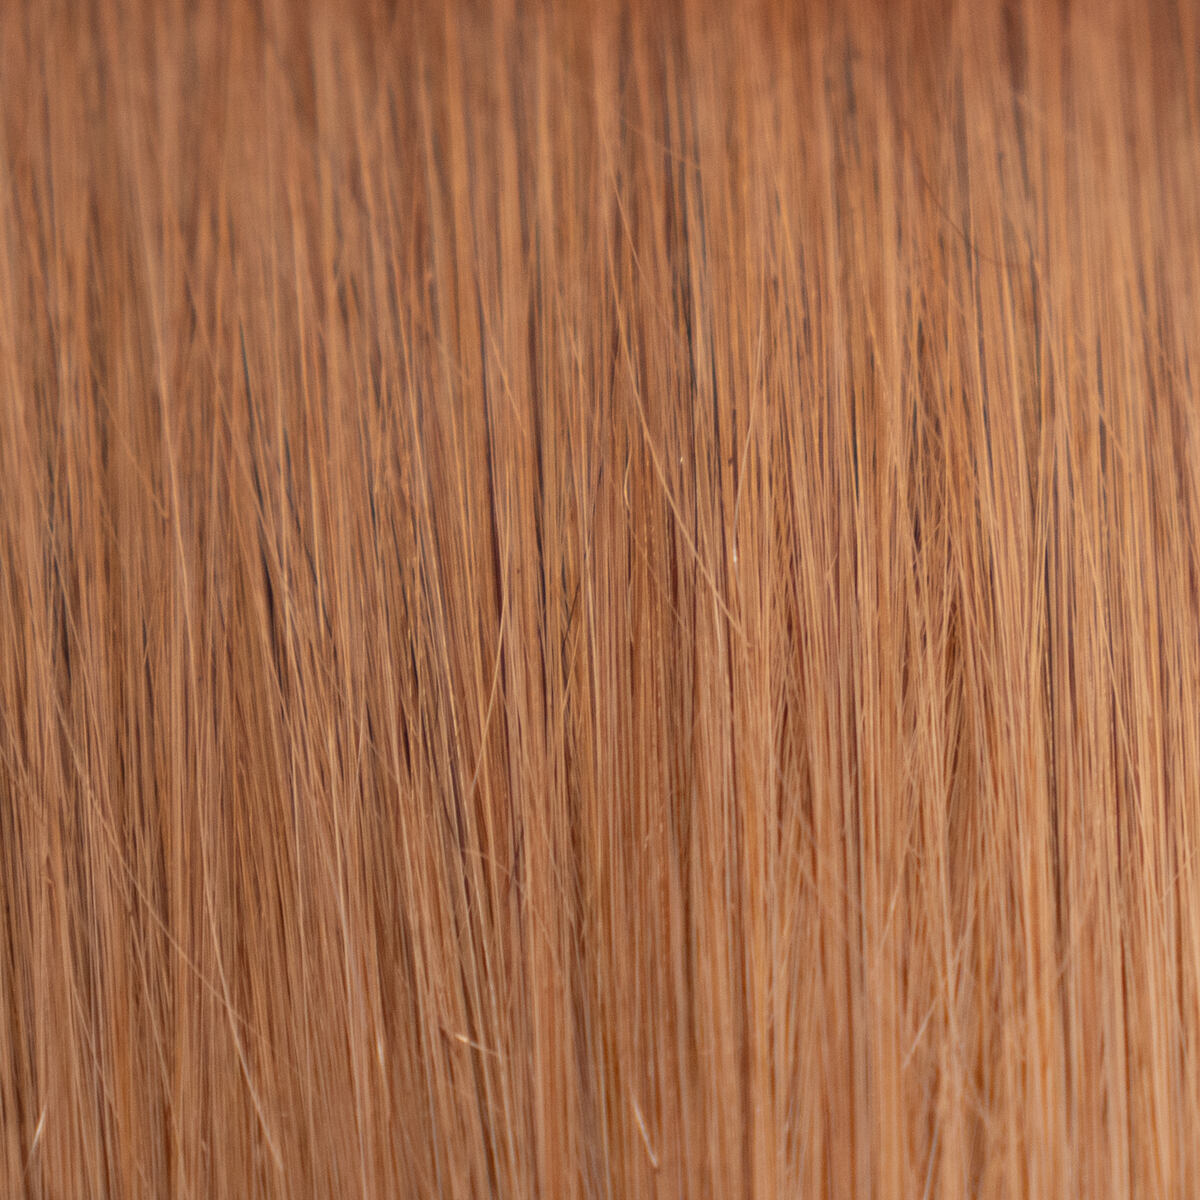 Tape-In 22" 50g Professional Hair Extensions - Chestnut Brown #6